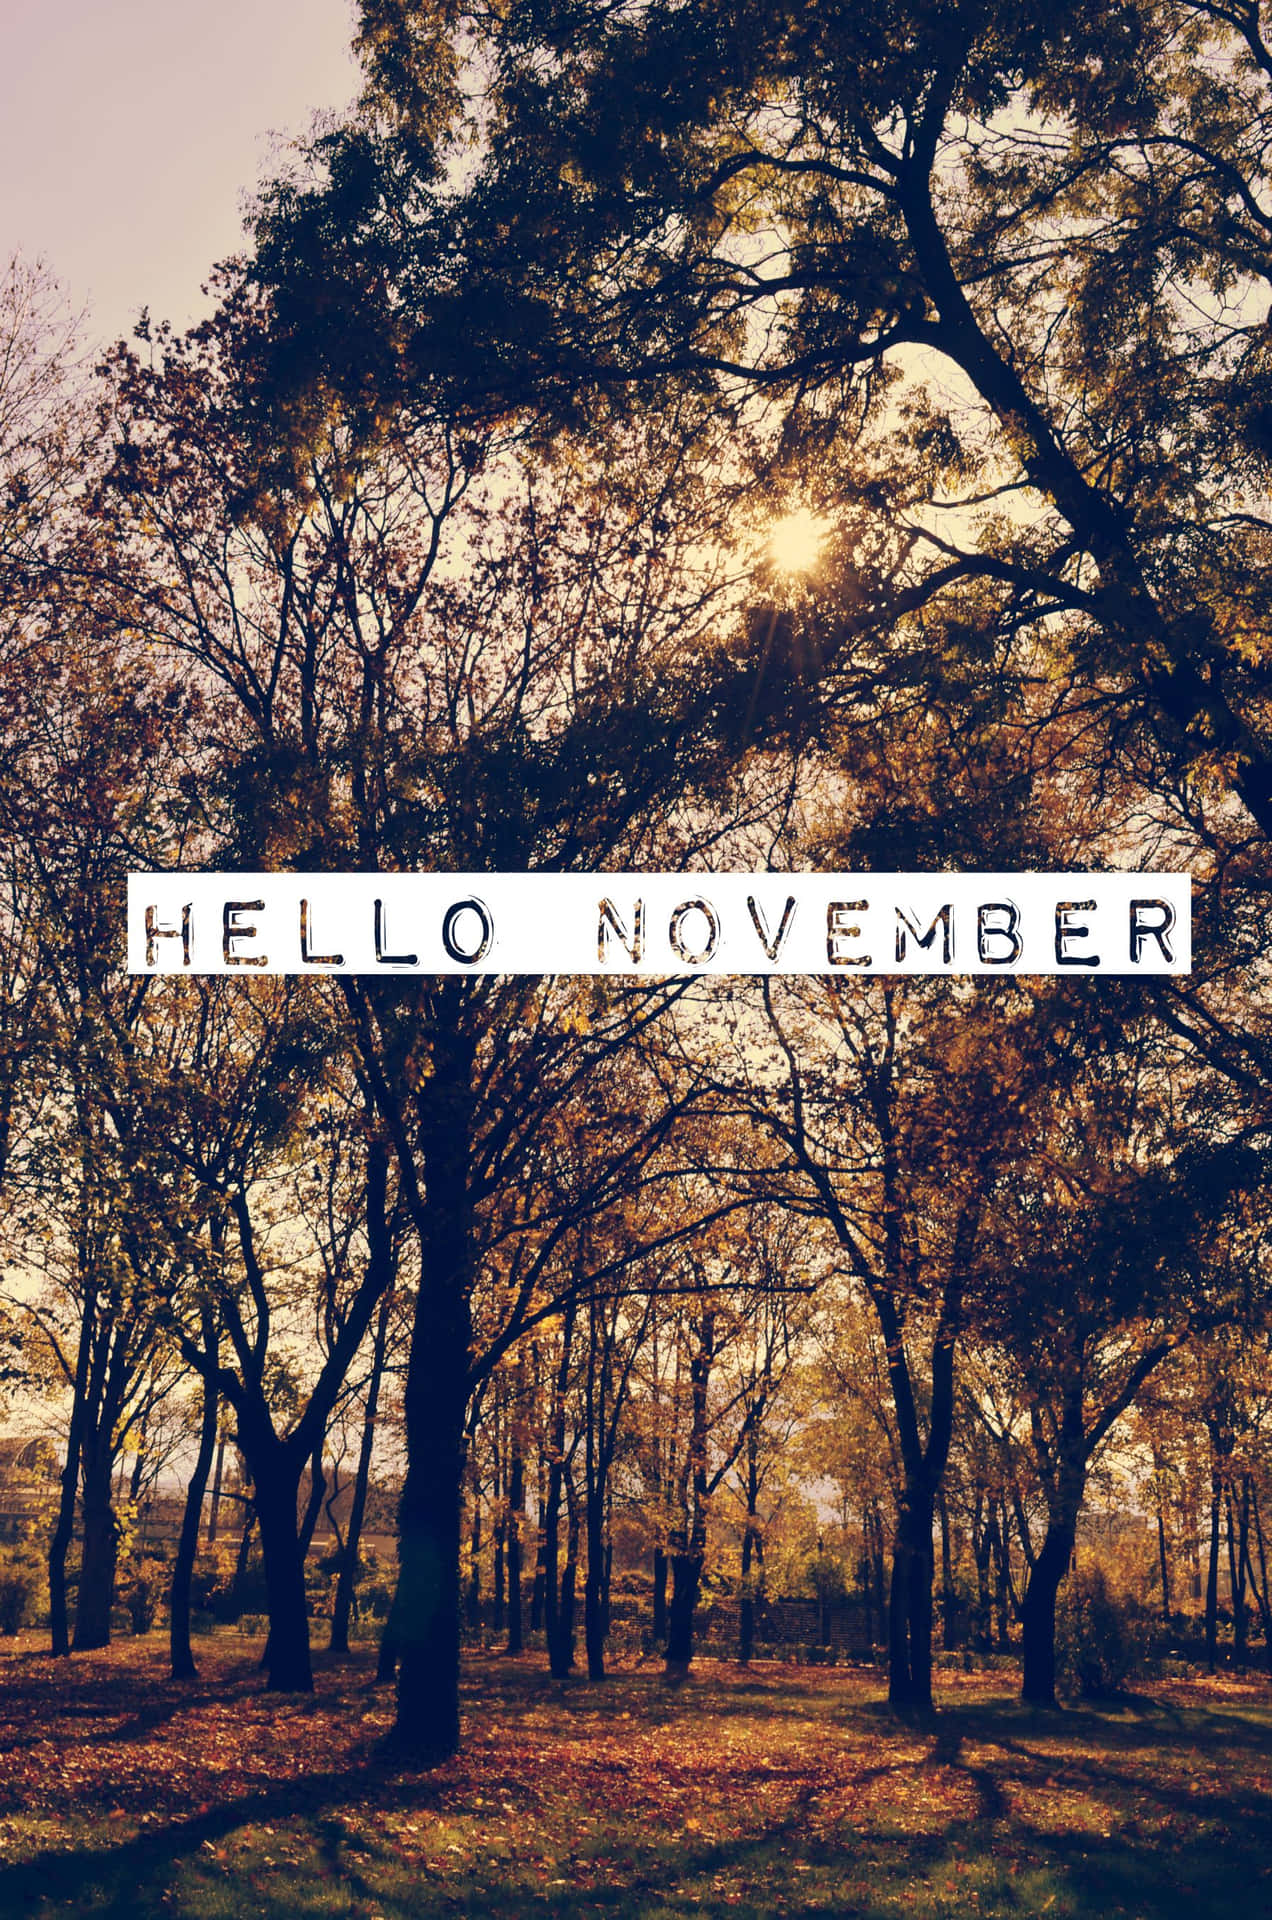 Energize Your New Month - November